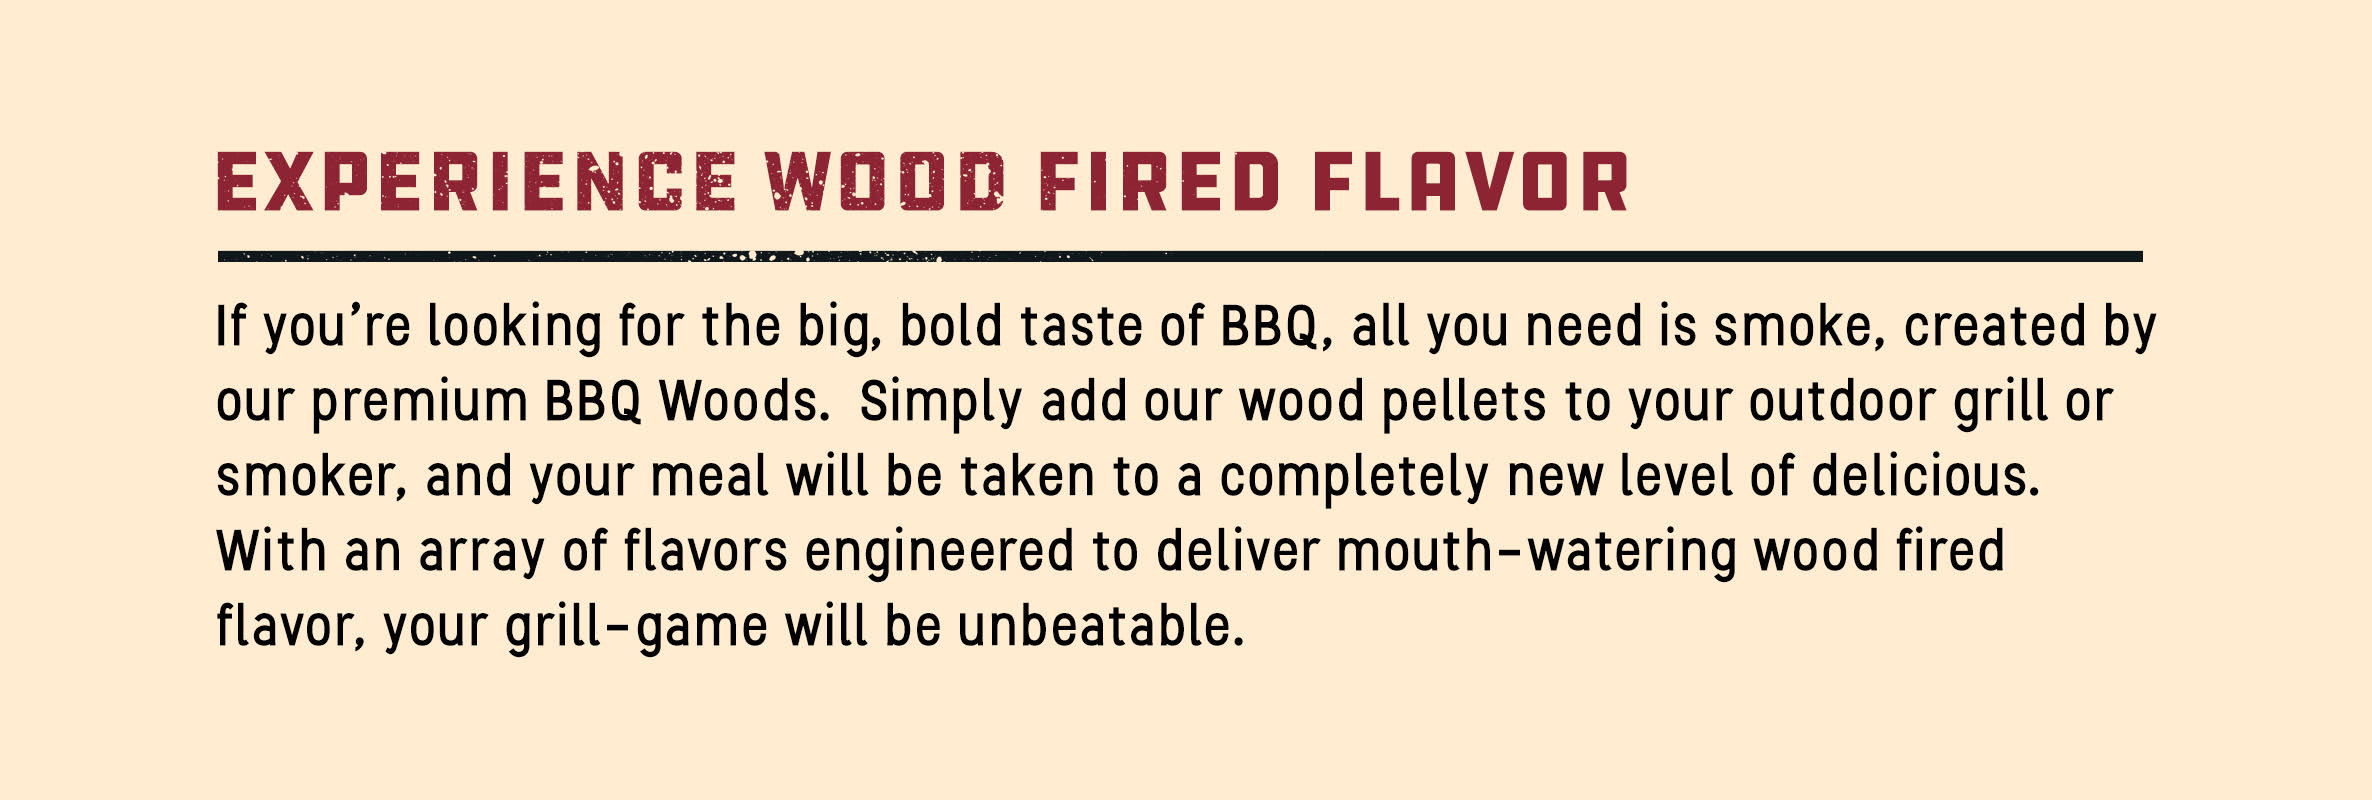 Wood Fired Flavor